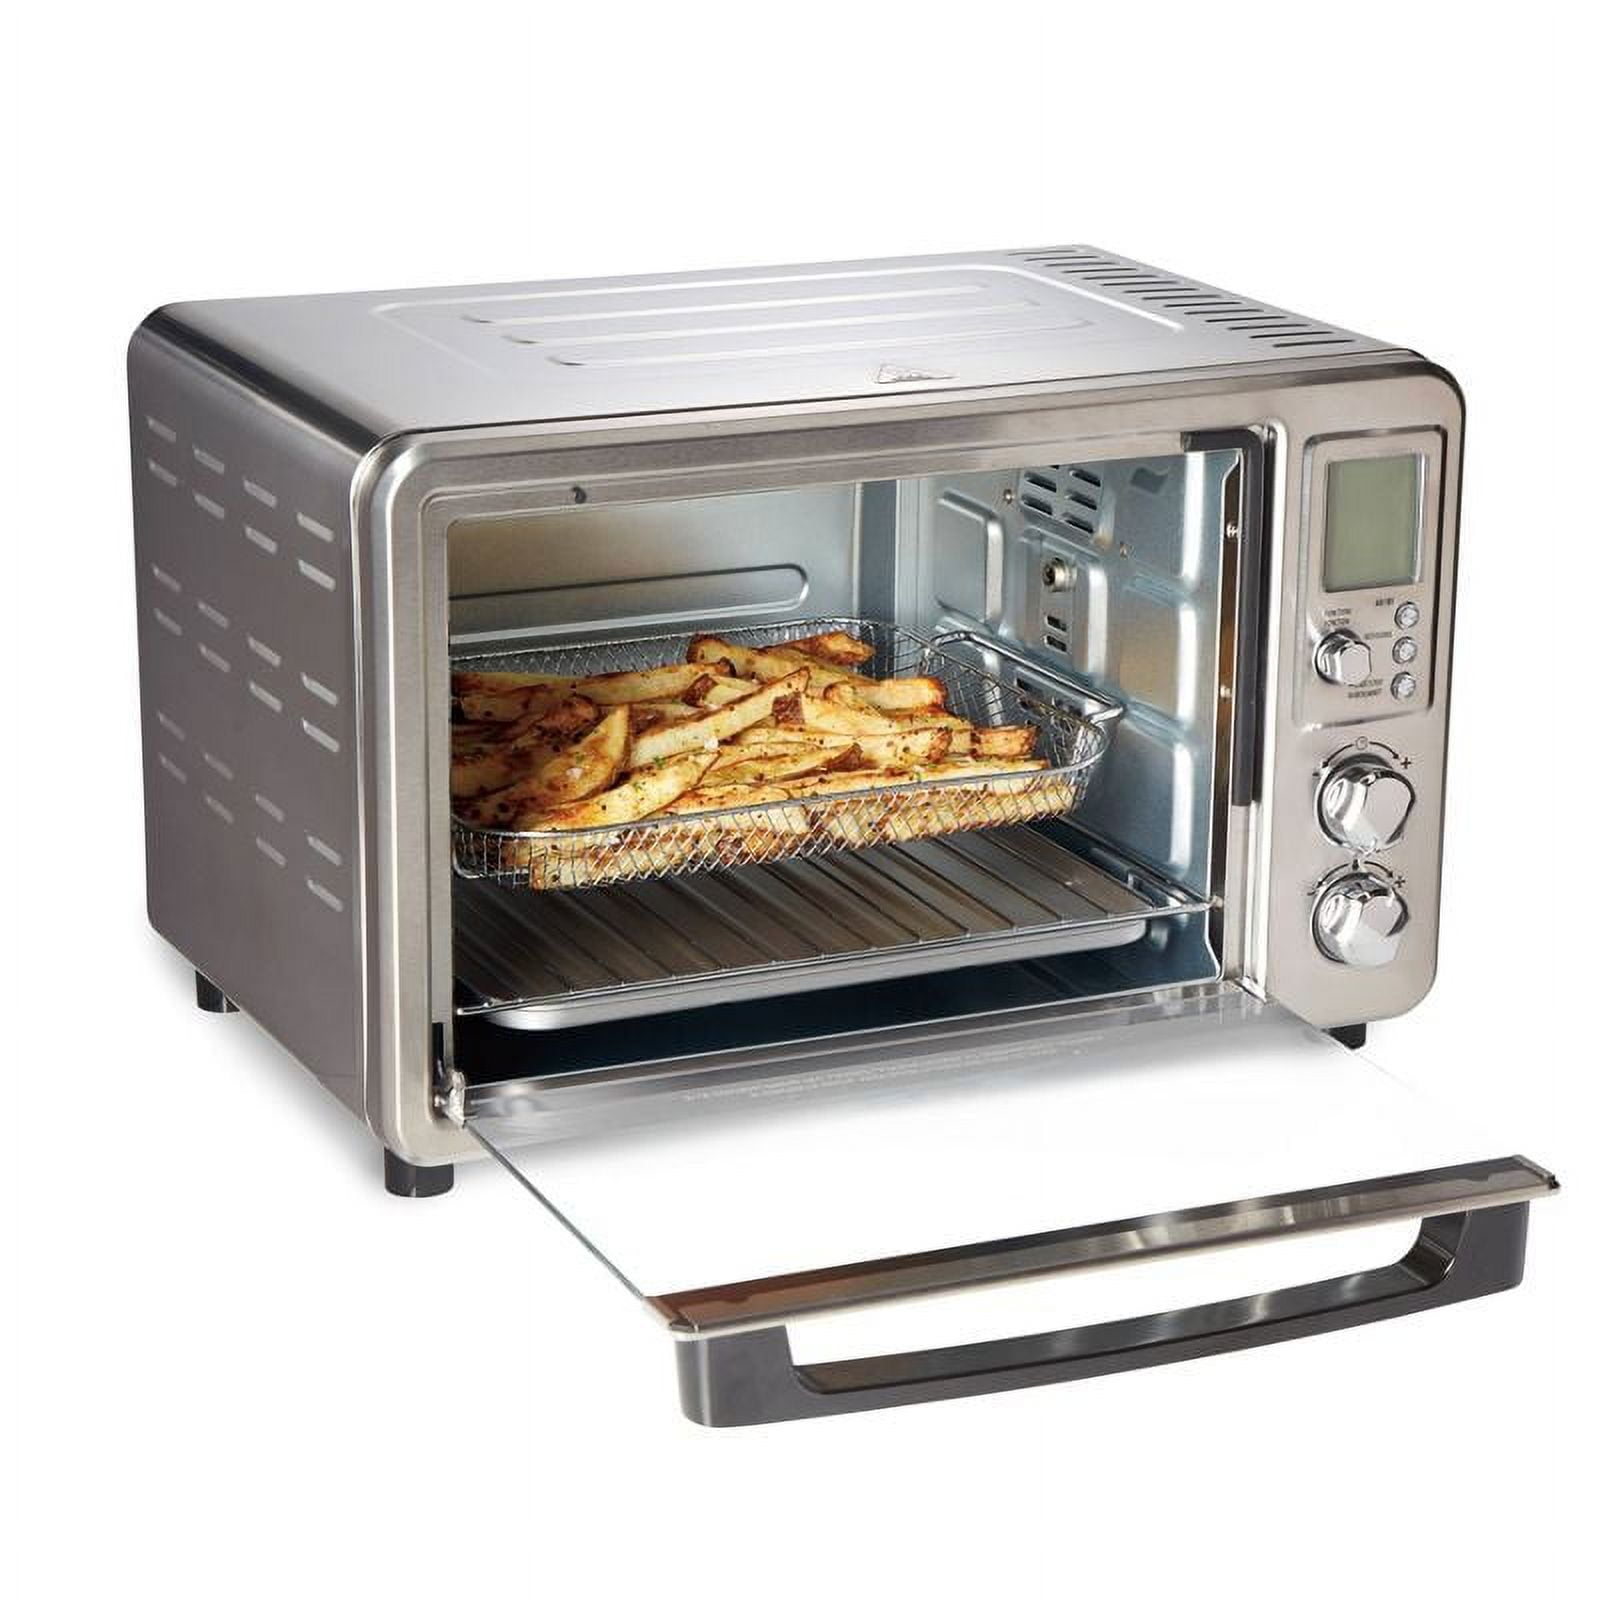  Hamilton Beach Sure-Crisp Toaster Oven Air Fryer Combo, Fits 9”  Pizza, 4 Slice Capacity, Powerful Circulation, Auto Shutoff, Stainless  Steel (31403) : Home & Kitchen